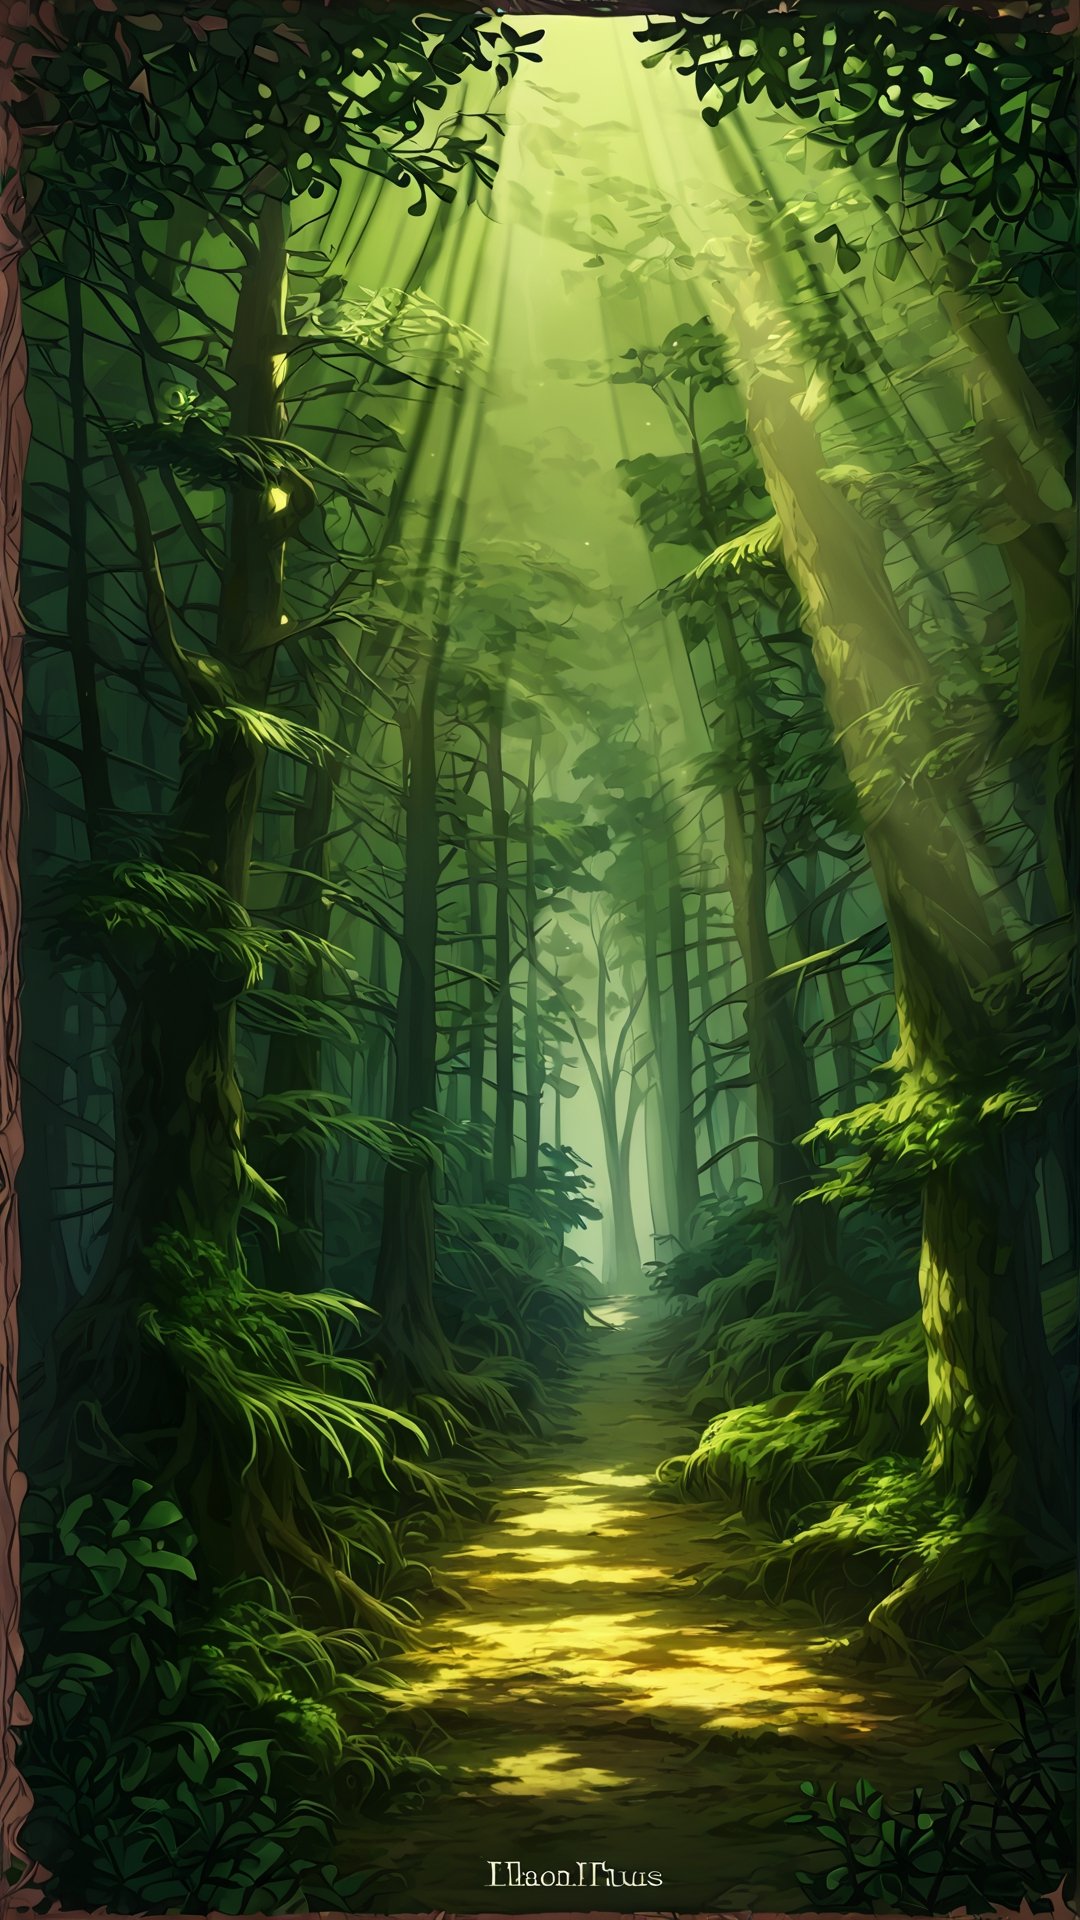 Create a captivating LOFI digital landscape illustration featuring a serene forest scene. Picture a dense forest bathed in the warm glow of the setting sun. Include elements like tall trees with lush green foliage, a cozy cabin nestled among the trees, and soft rays of sunlight filtering through the branches. Emphasize the peaceful atmosphere with gentle shadows and a serene color palette. Capture the tranquility and beauty of nature in the golden hour, highlighting the harmony between the natural environment and human habitation. Use subtle textures and a nostalgic vibe to enhance the LOFI aesthetic, creating a timeless and soothing artwork.